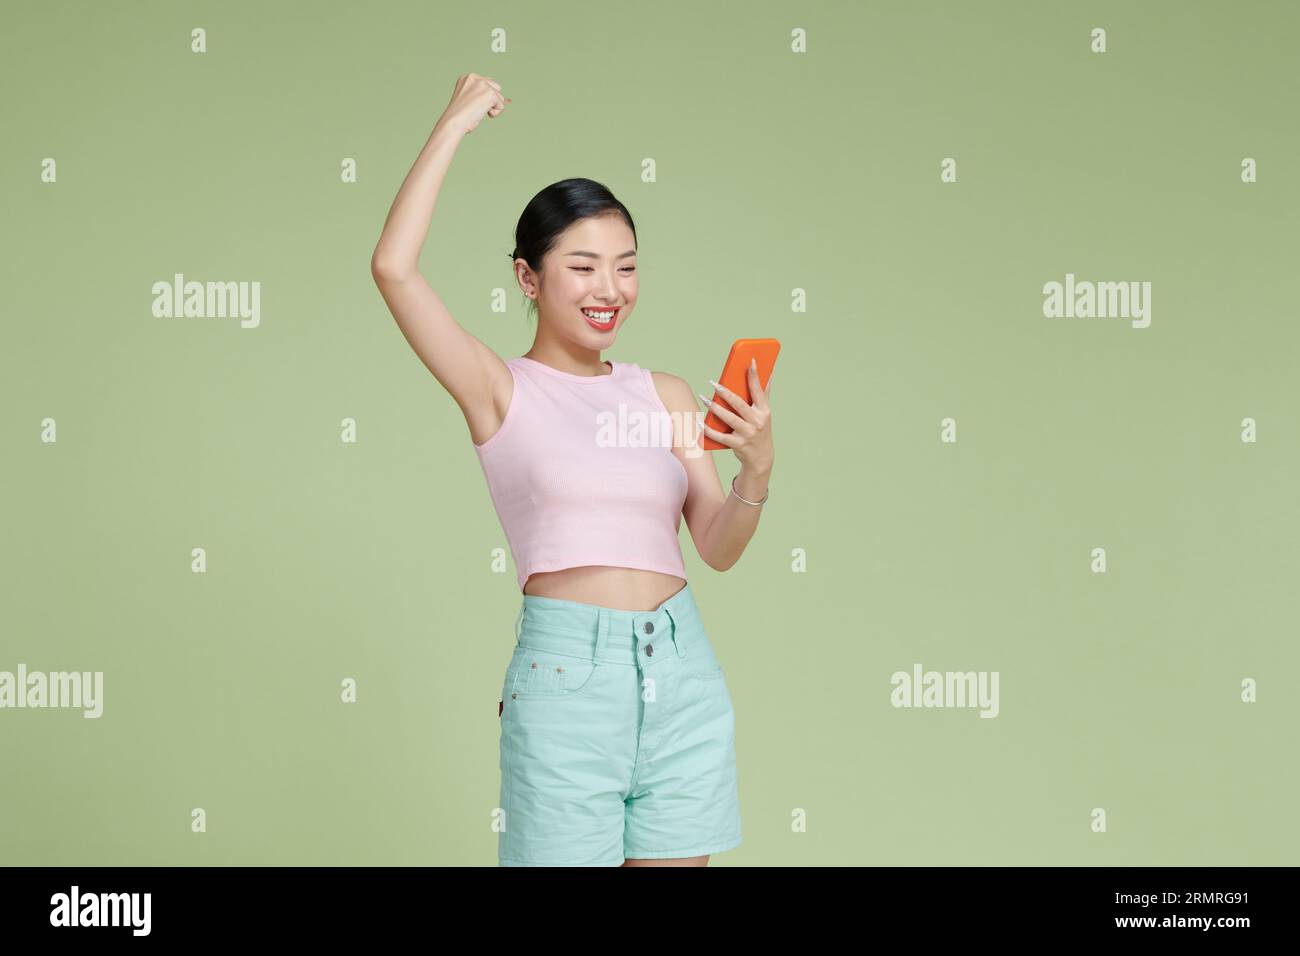 Happy Asian woman holding a smartphone and winning the prize. Stock Photo